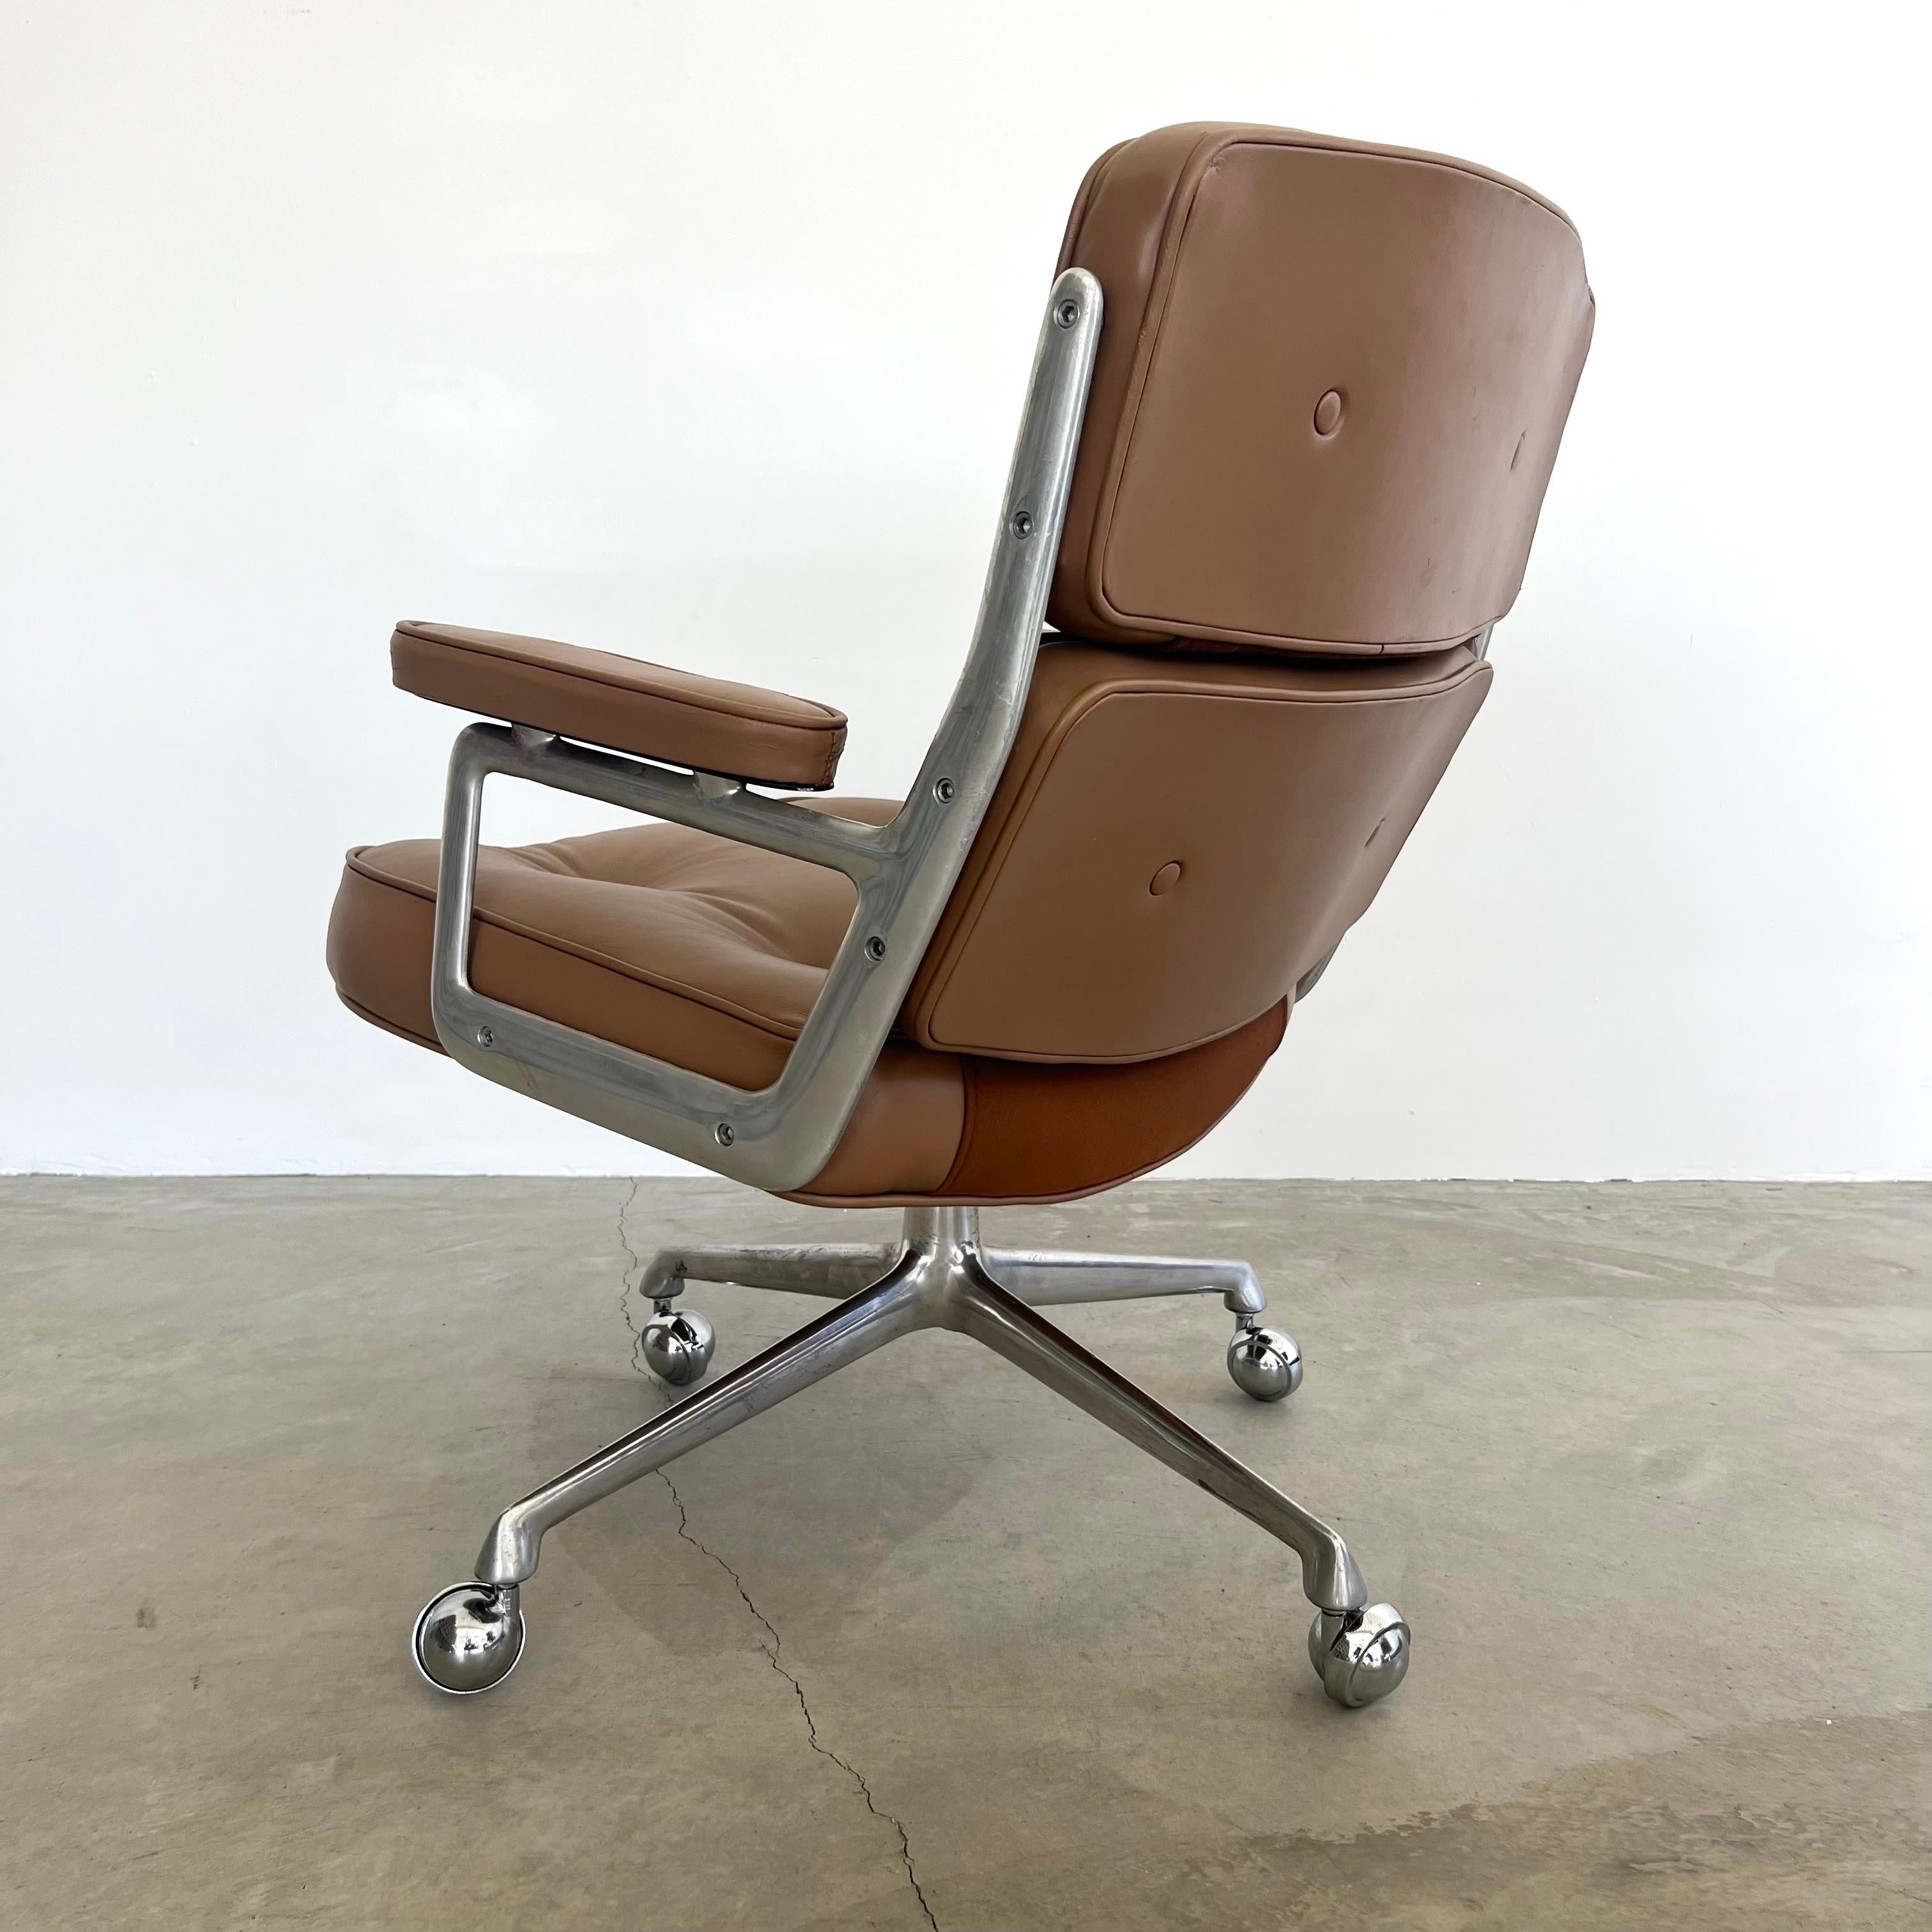 Aluminum Eames Time Life Chair in Tan Leather for Herman Miller, 1980s USA